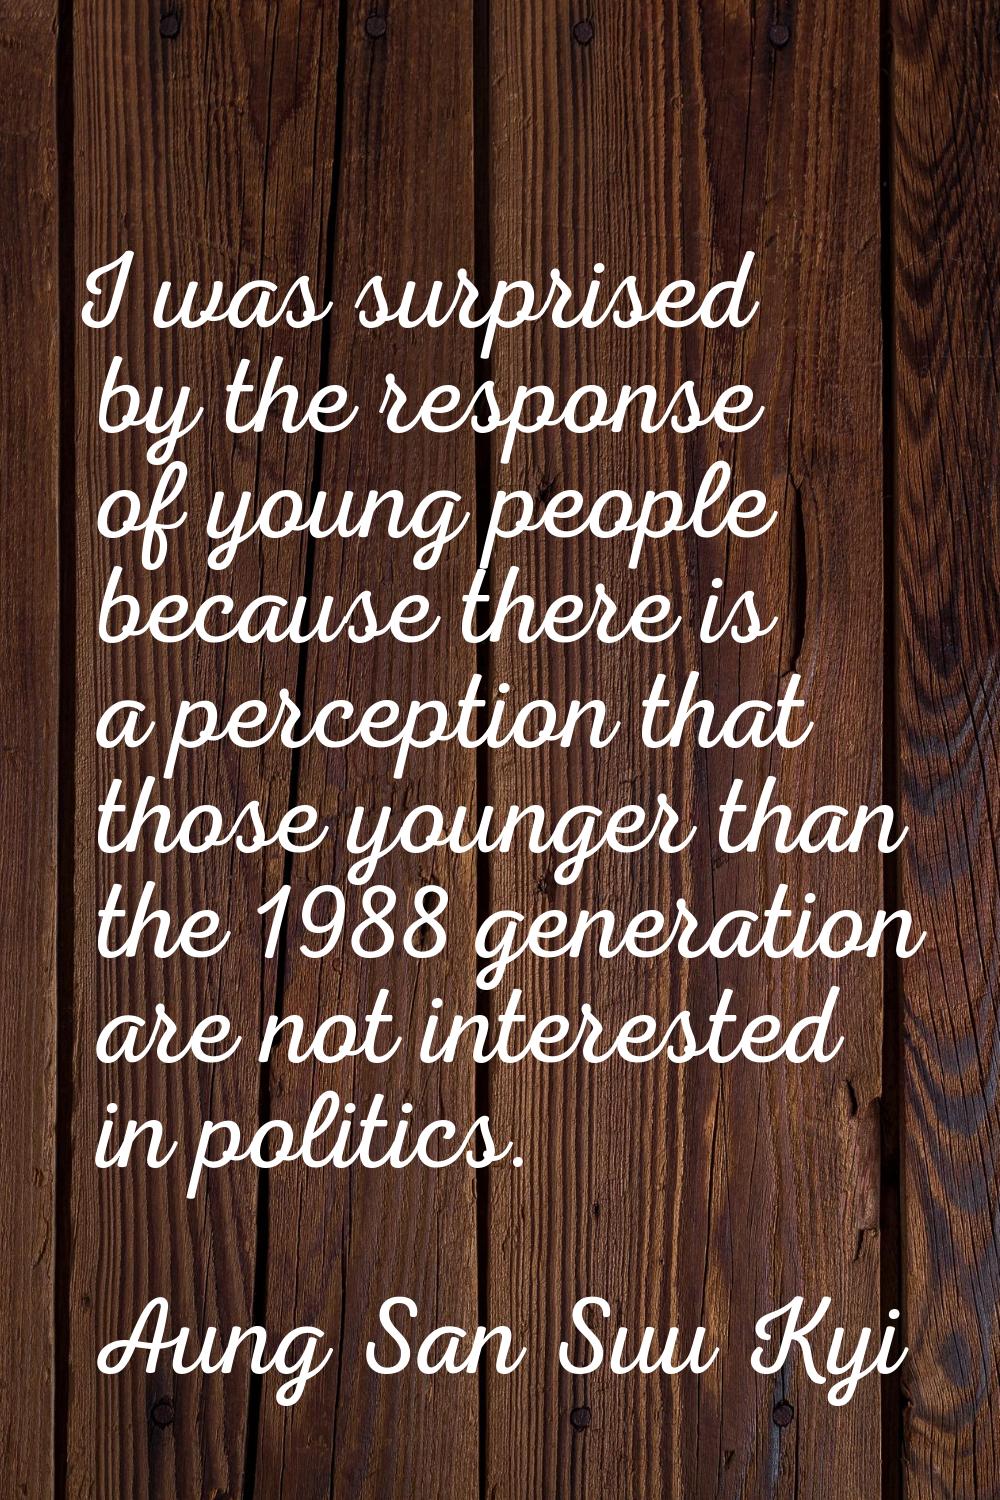 I was surprised by the response of young people because there is a perception that those younger th